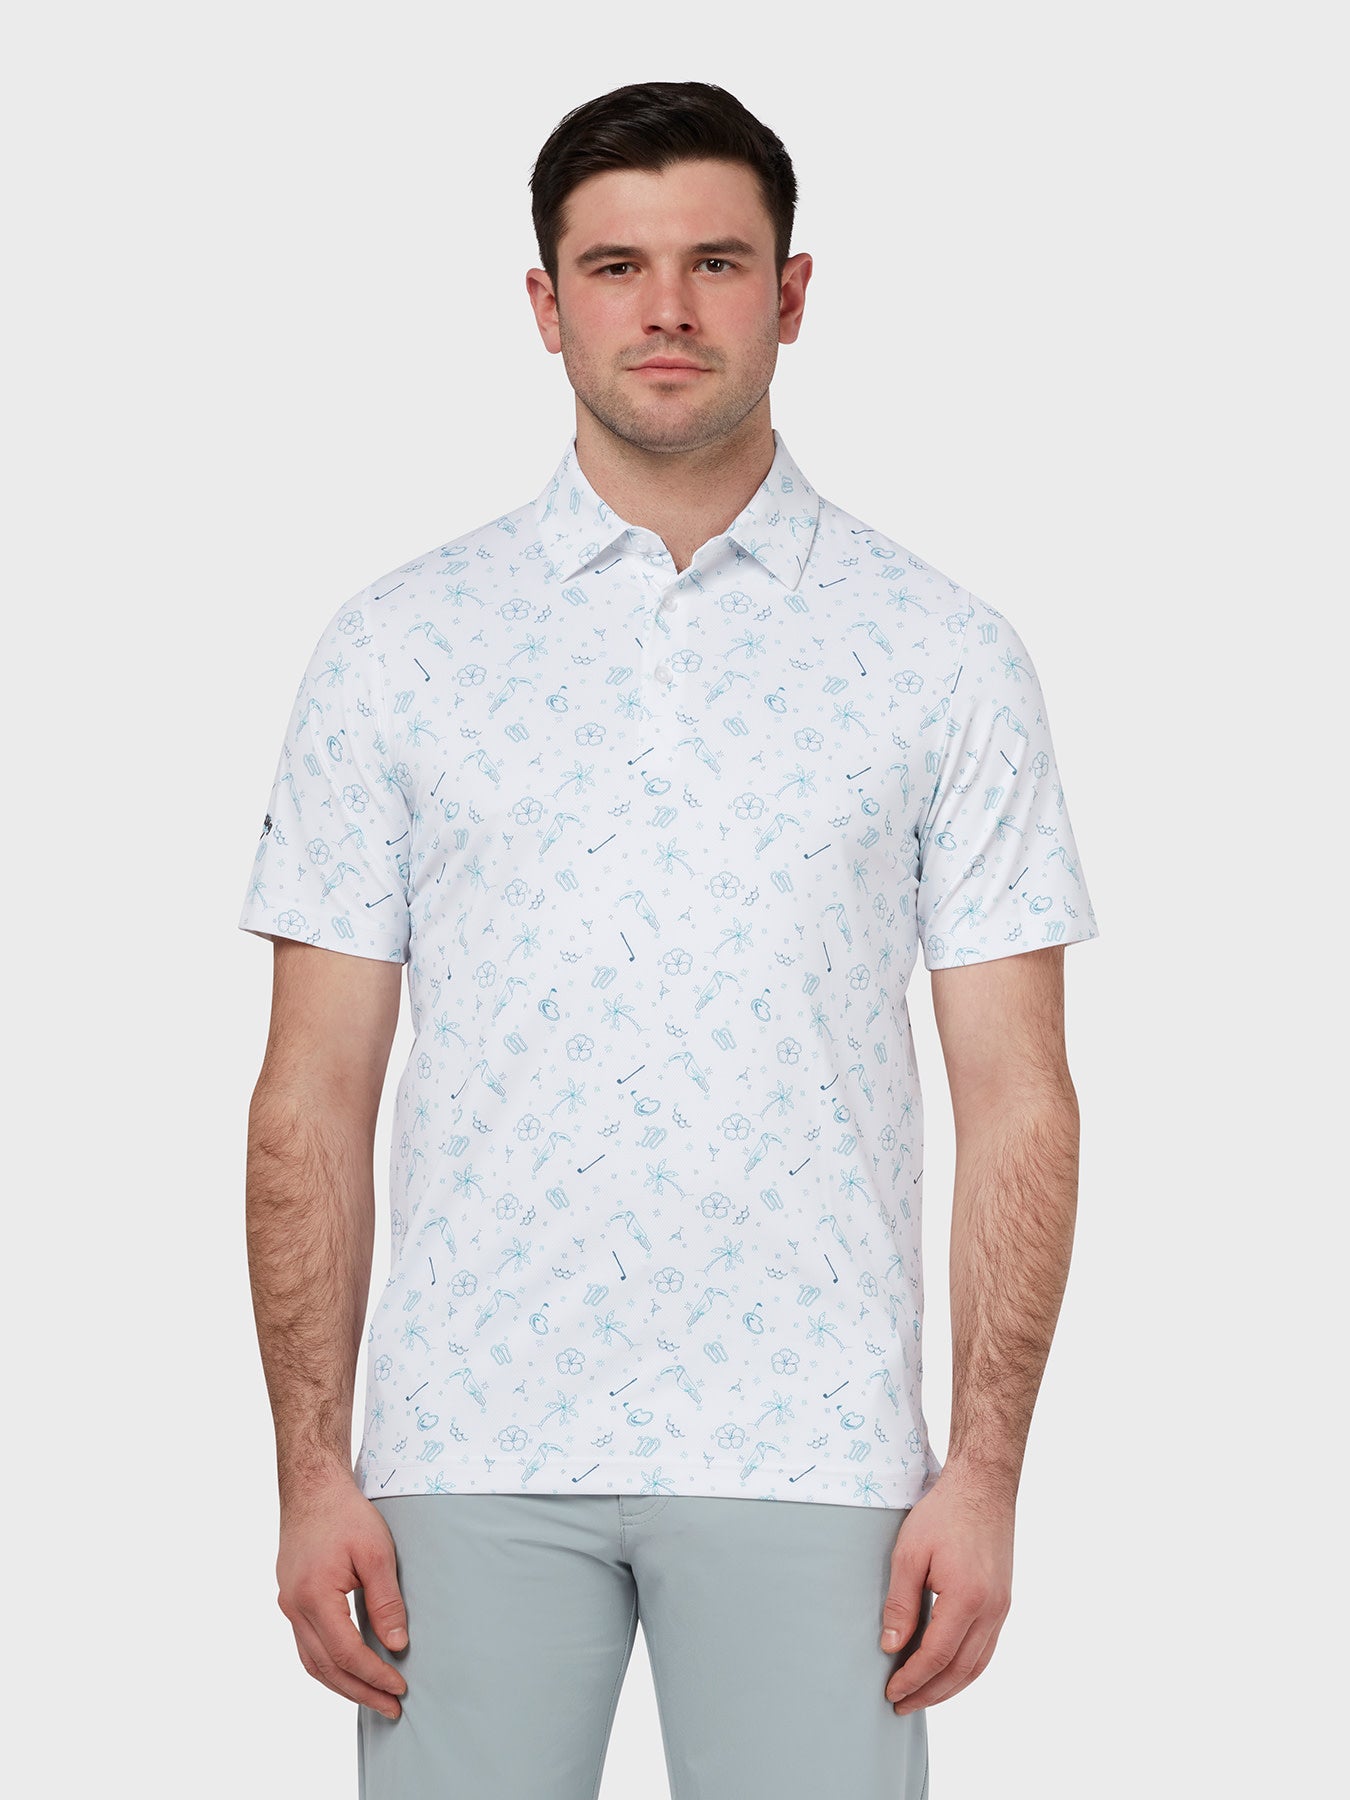 View All Over Golf Tucan Print Polo In Bright White information